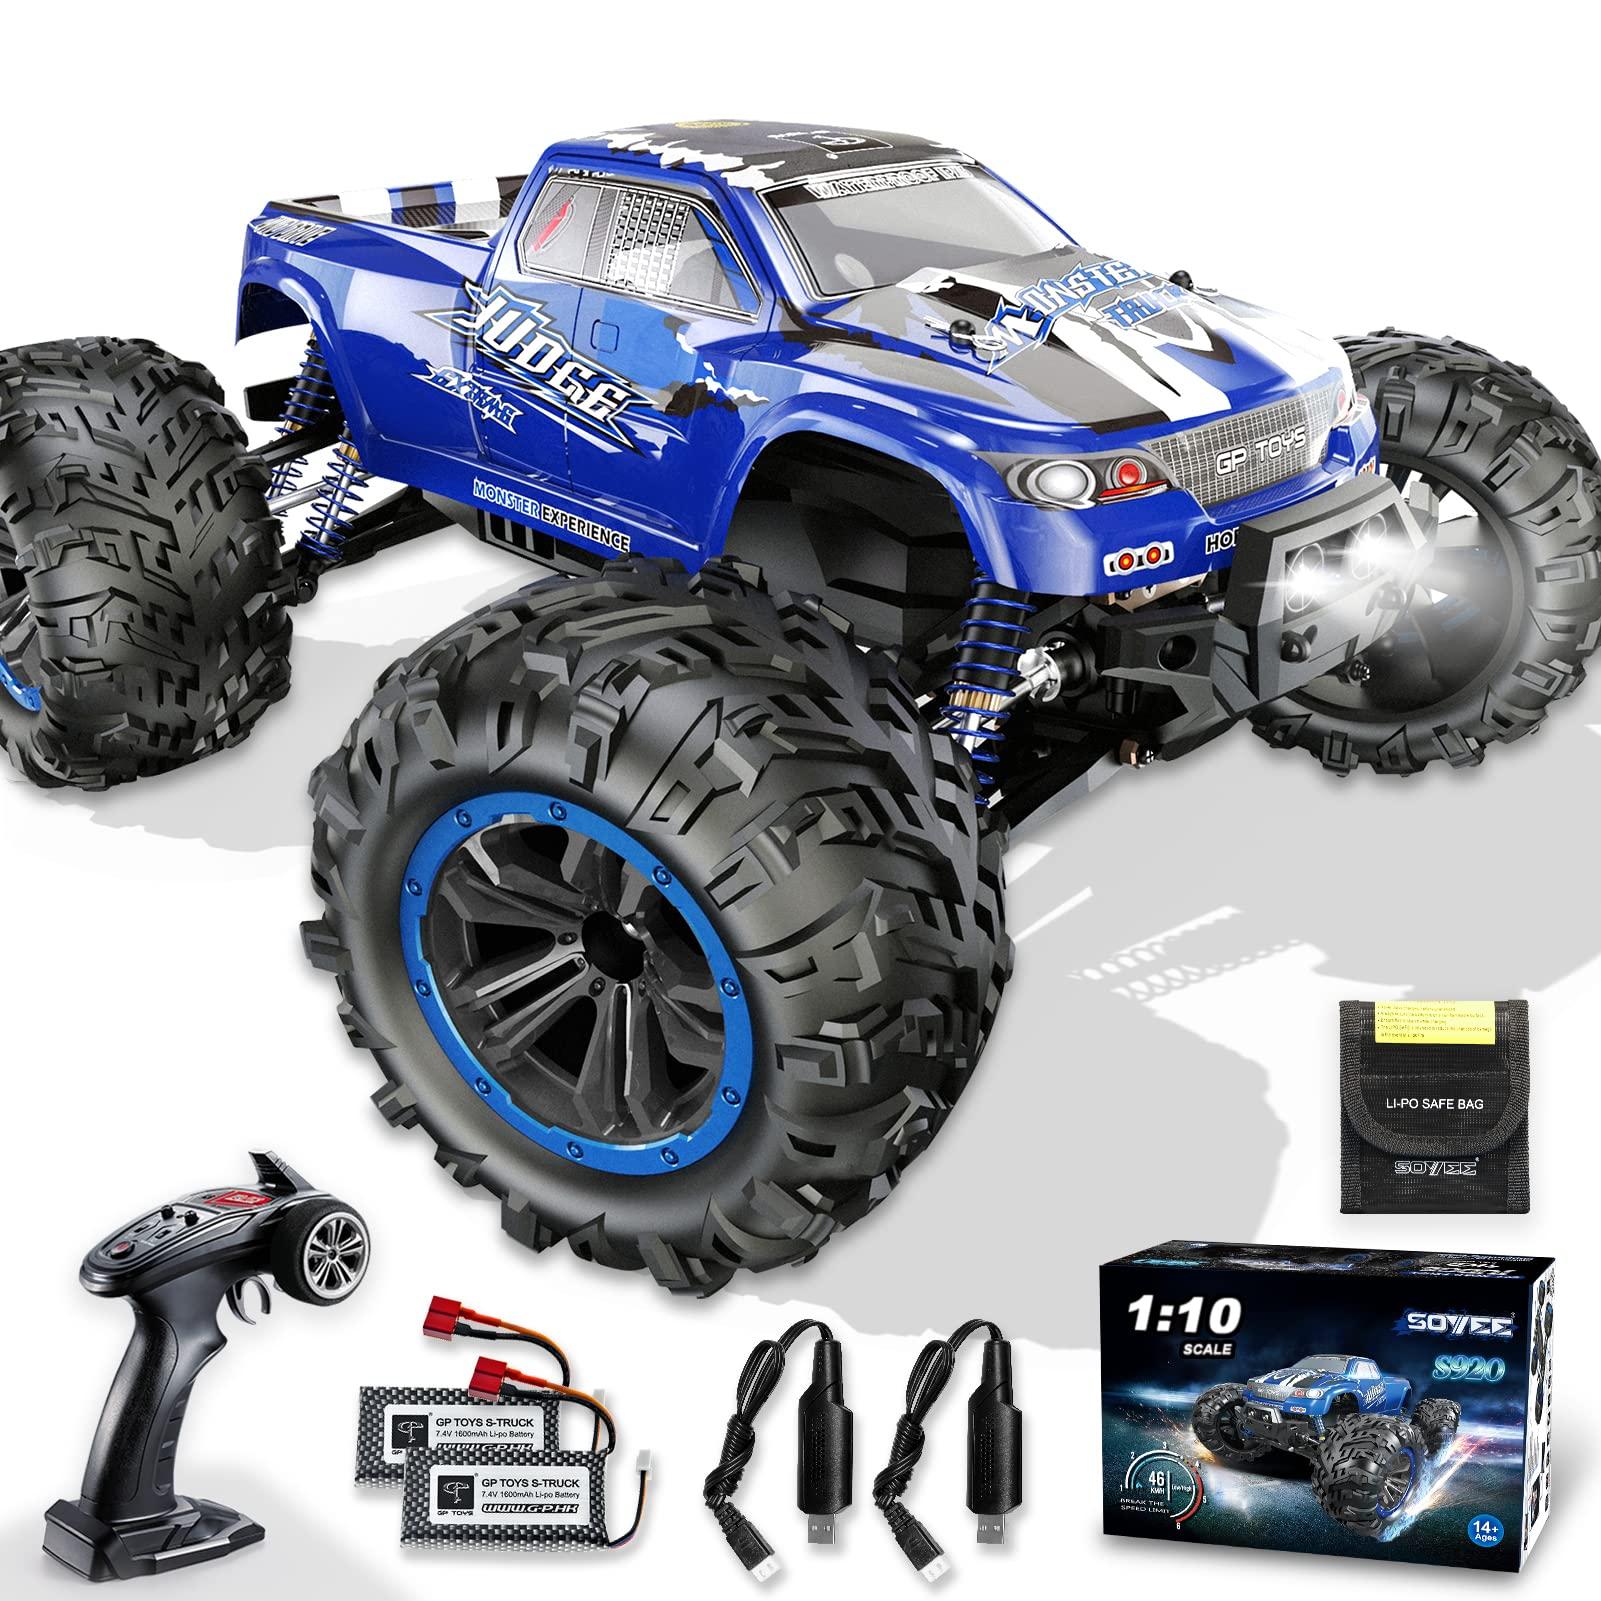 1/10 Electric Rc Truck: Unbeatable Performance: A Look at the 1/10 Electric RC Truck